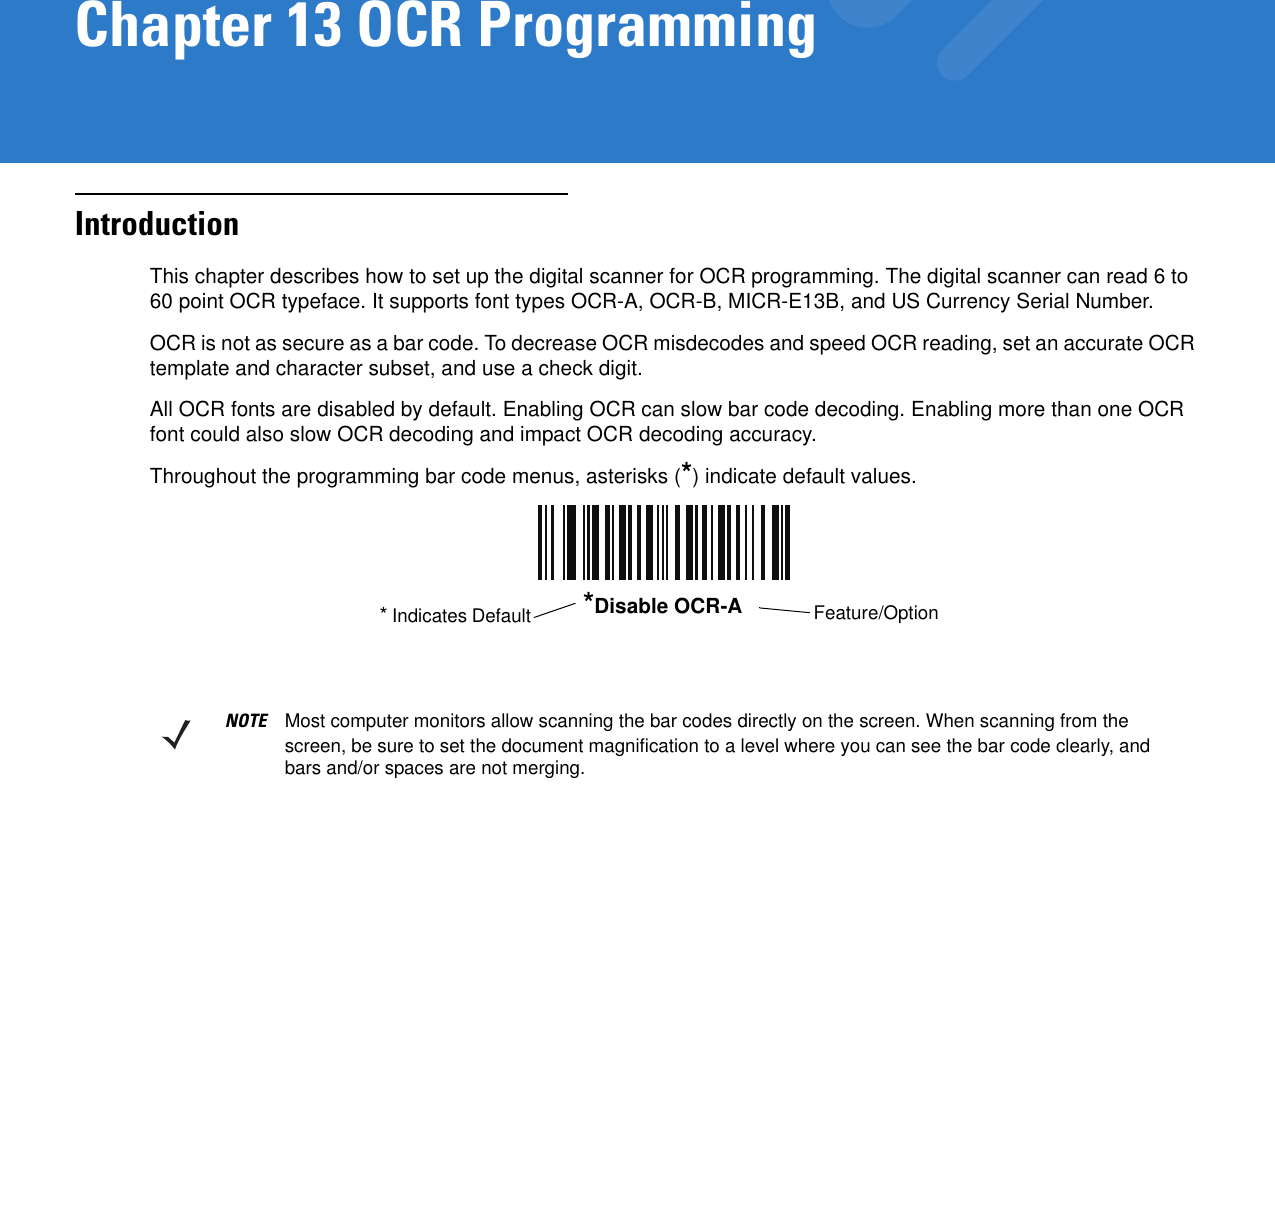 Chapter 13 OCR ProgrammingIntroductionThis chapter describes how to set up the digital scanner for OCR programming. The digital scanner can read 6 to 60 point OCR typeface. It supports font types OCR-A, OCR-B, MICR-E13B, and US Currency Serial Number.OCR is not as secure as a bar code. To decrease OCR misdecodes and speed OCR reading, set an accurate OCR template and character subset, and use a check digit.All OCR fonts are disabled by default. Enabling OCR can slow bar code decoding. Enabling more than one OCR font could also slow OCR decoding and impact OCR decoding accuracy.Throughout the programming bar code menus, asterisks (*) indicate default values.*Disable OCR-A Feature/Option* Indicates DefaultNOTE Most computer monitors allow scanning the bar codes directly on the screen. When scanning from the screen, be sure to set the document magnification to a level where you can see the bar code clearly, and bars and/or spaces are not merging.